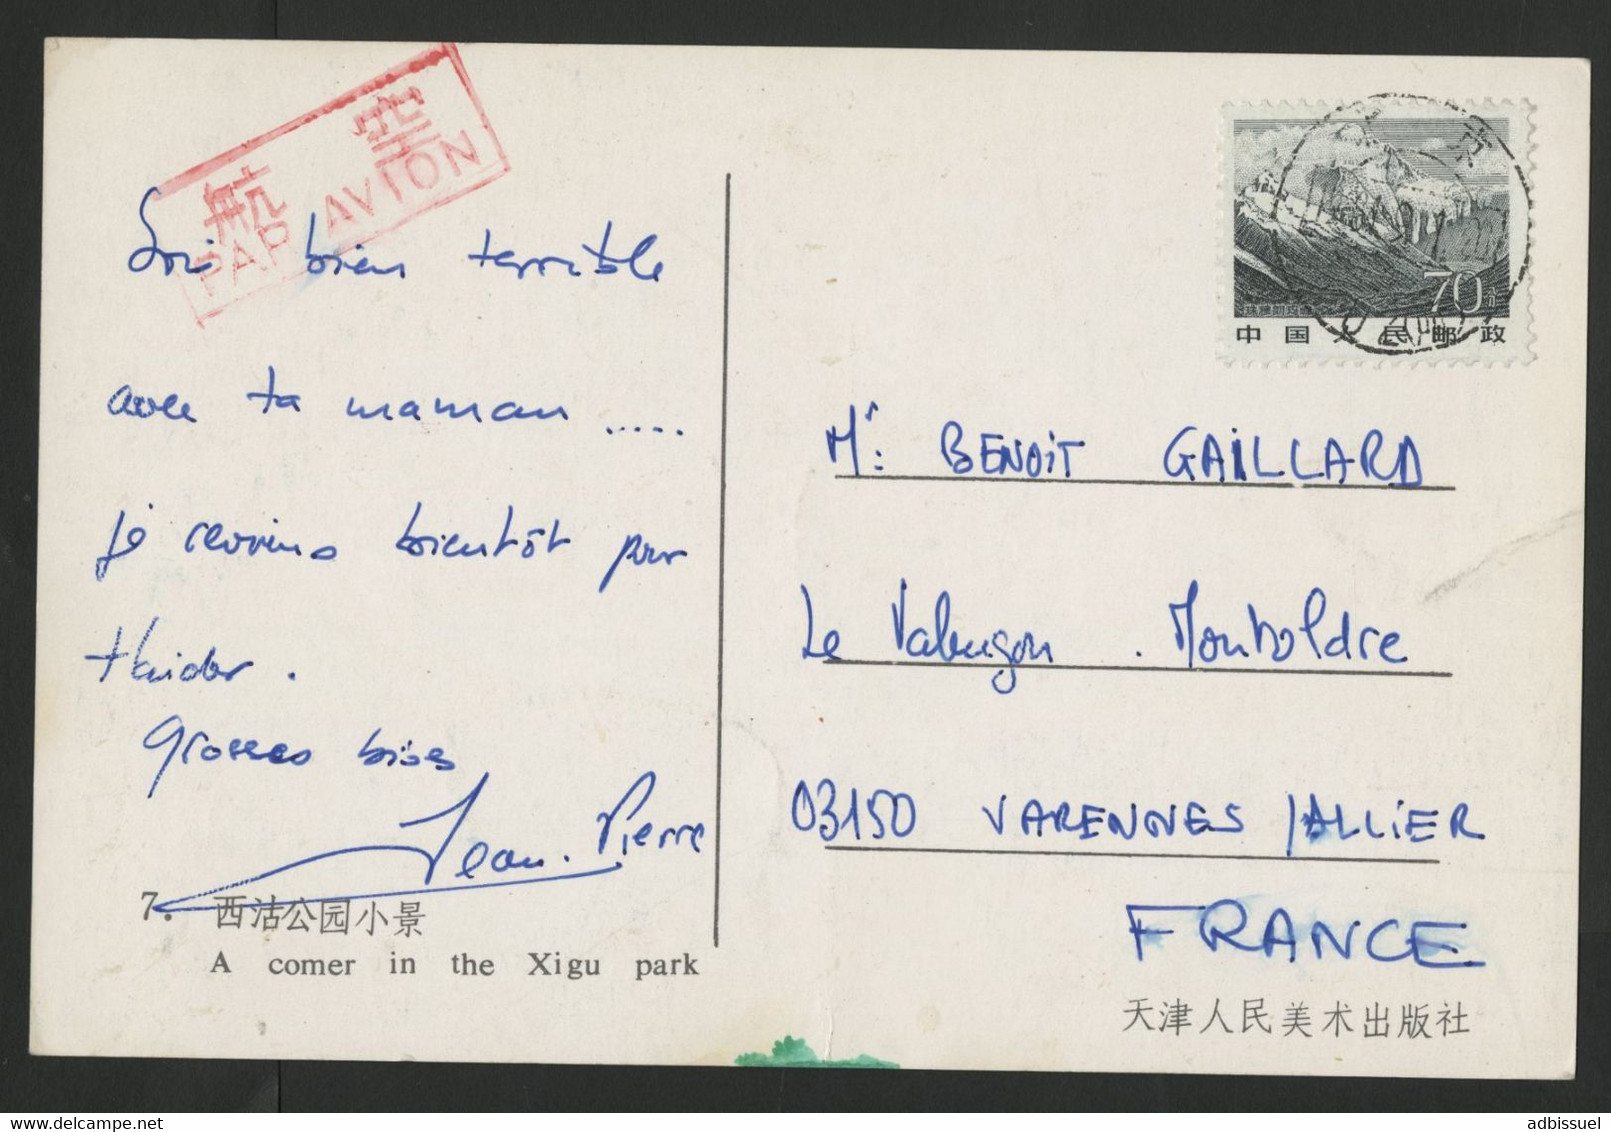 CHINA N° 2588 Zhumulangma / Everest On A Postcard By Airmail To France. - Storia Postale